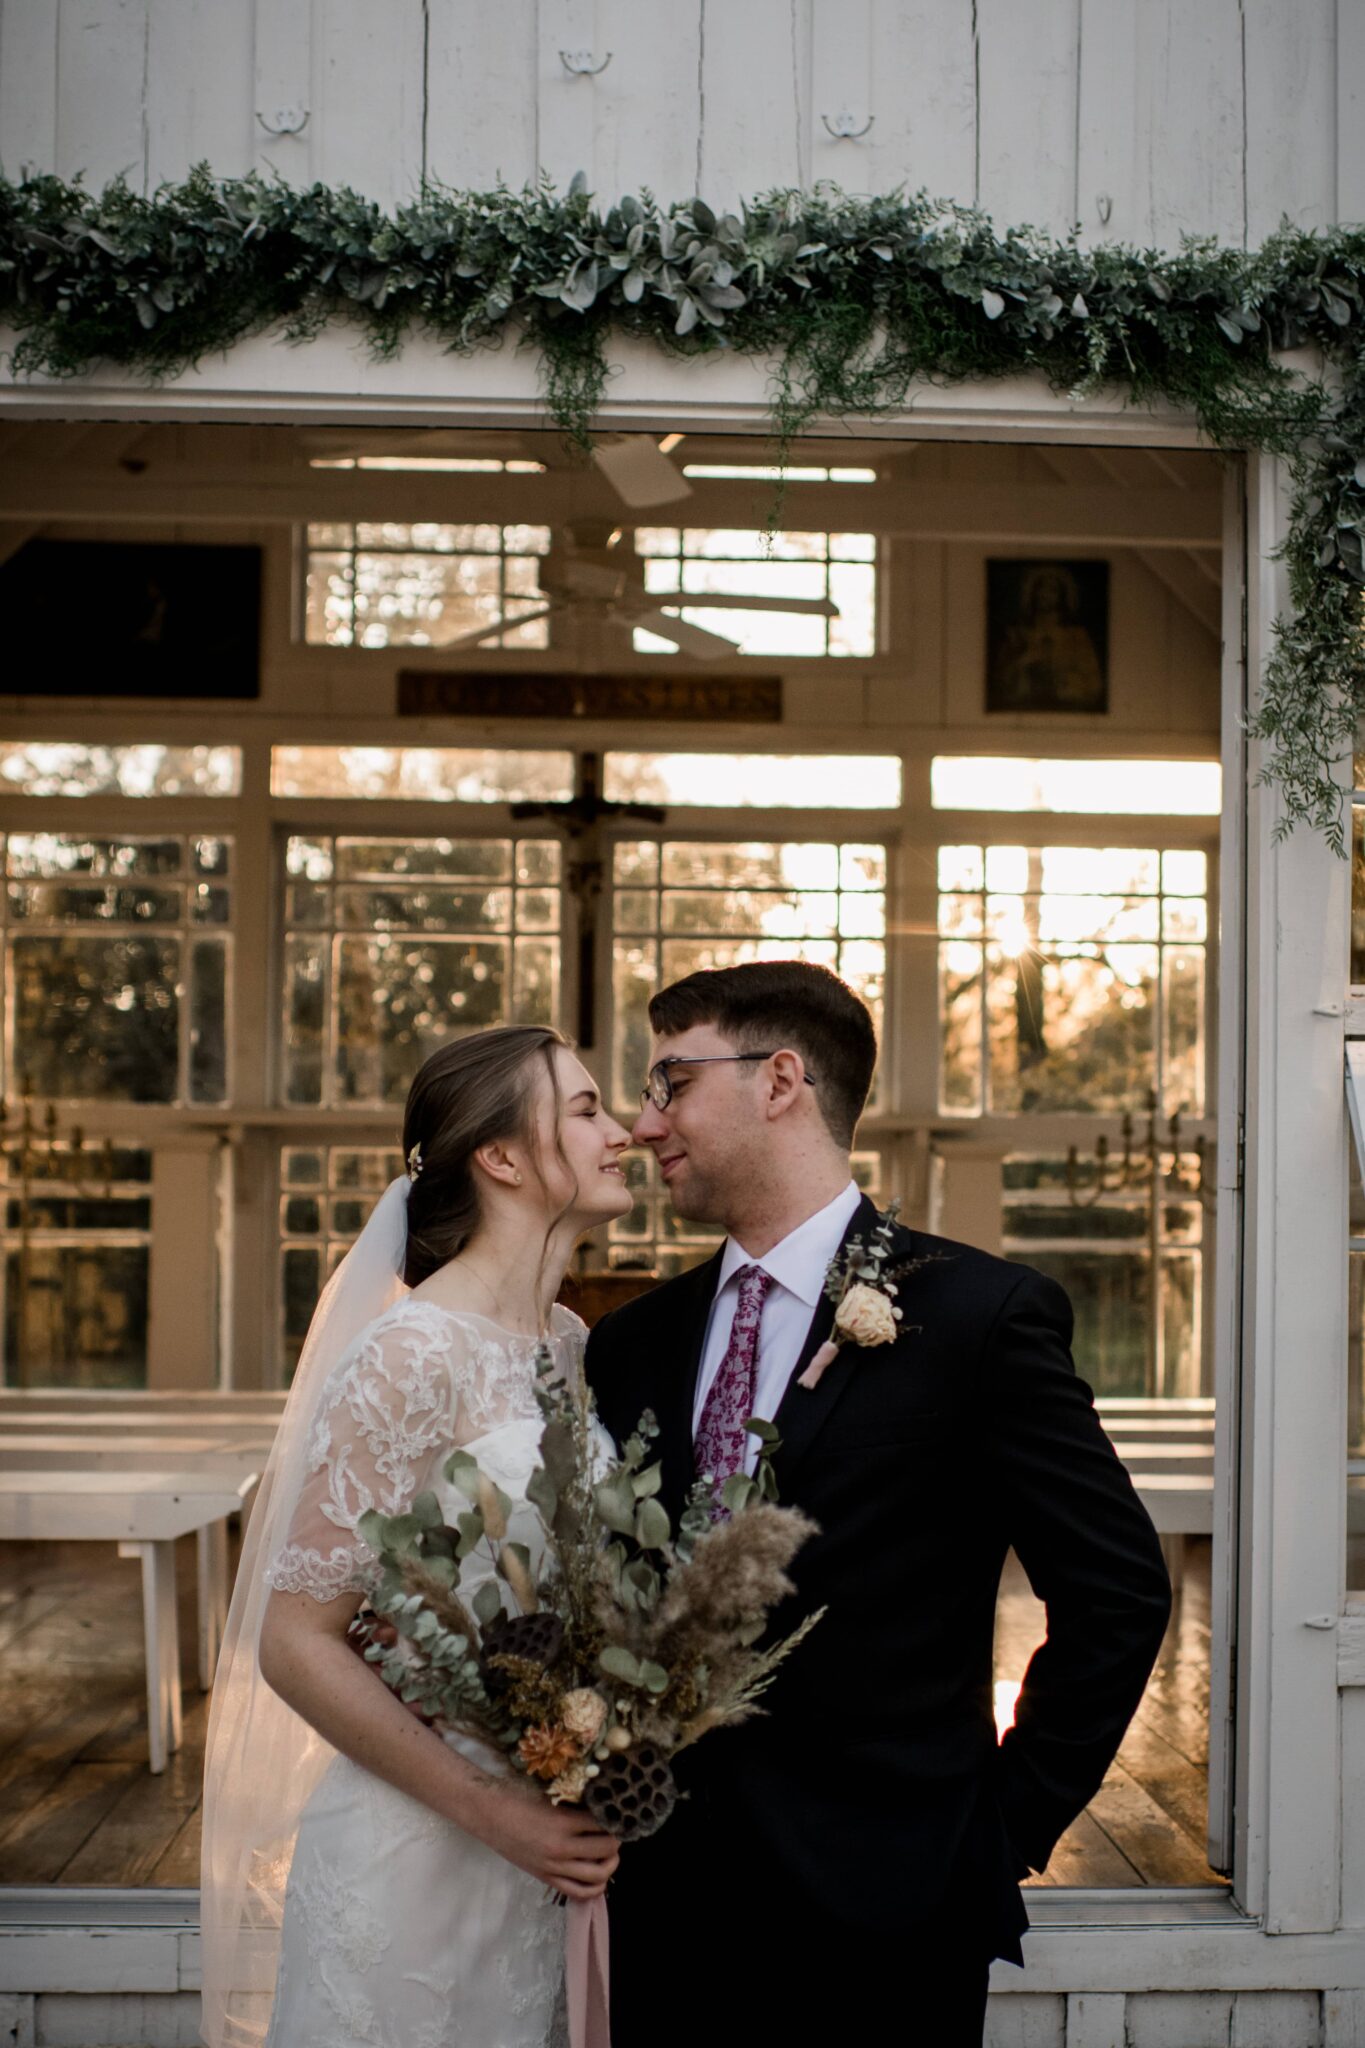 the texas bride and groom go in for a kiss during their bride and groom portraits in front of the 7F lodge in golden hours